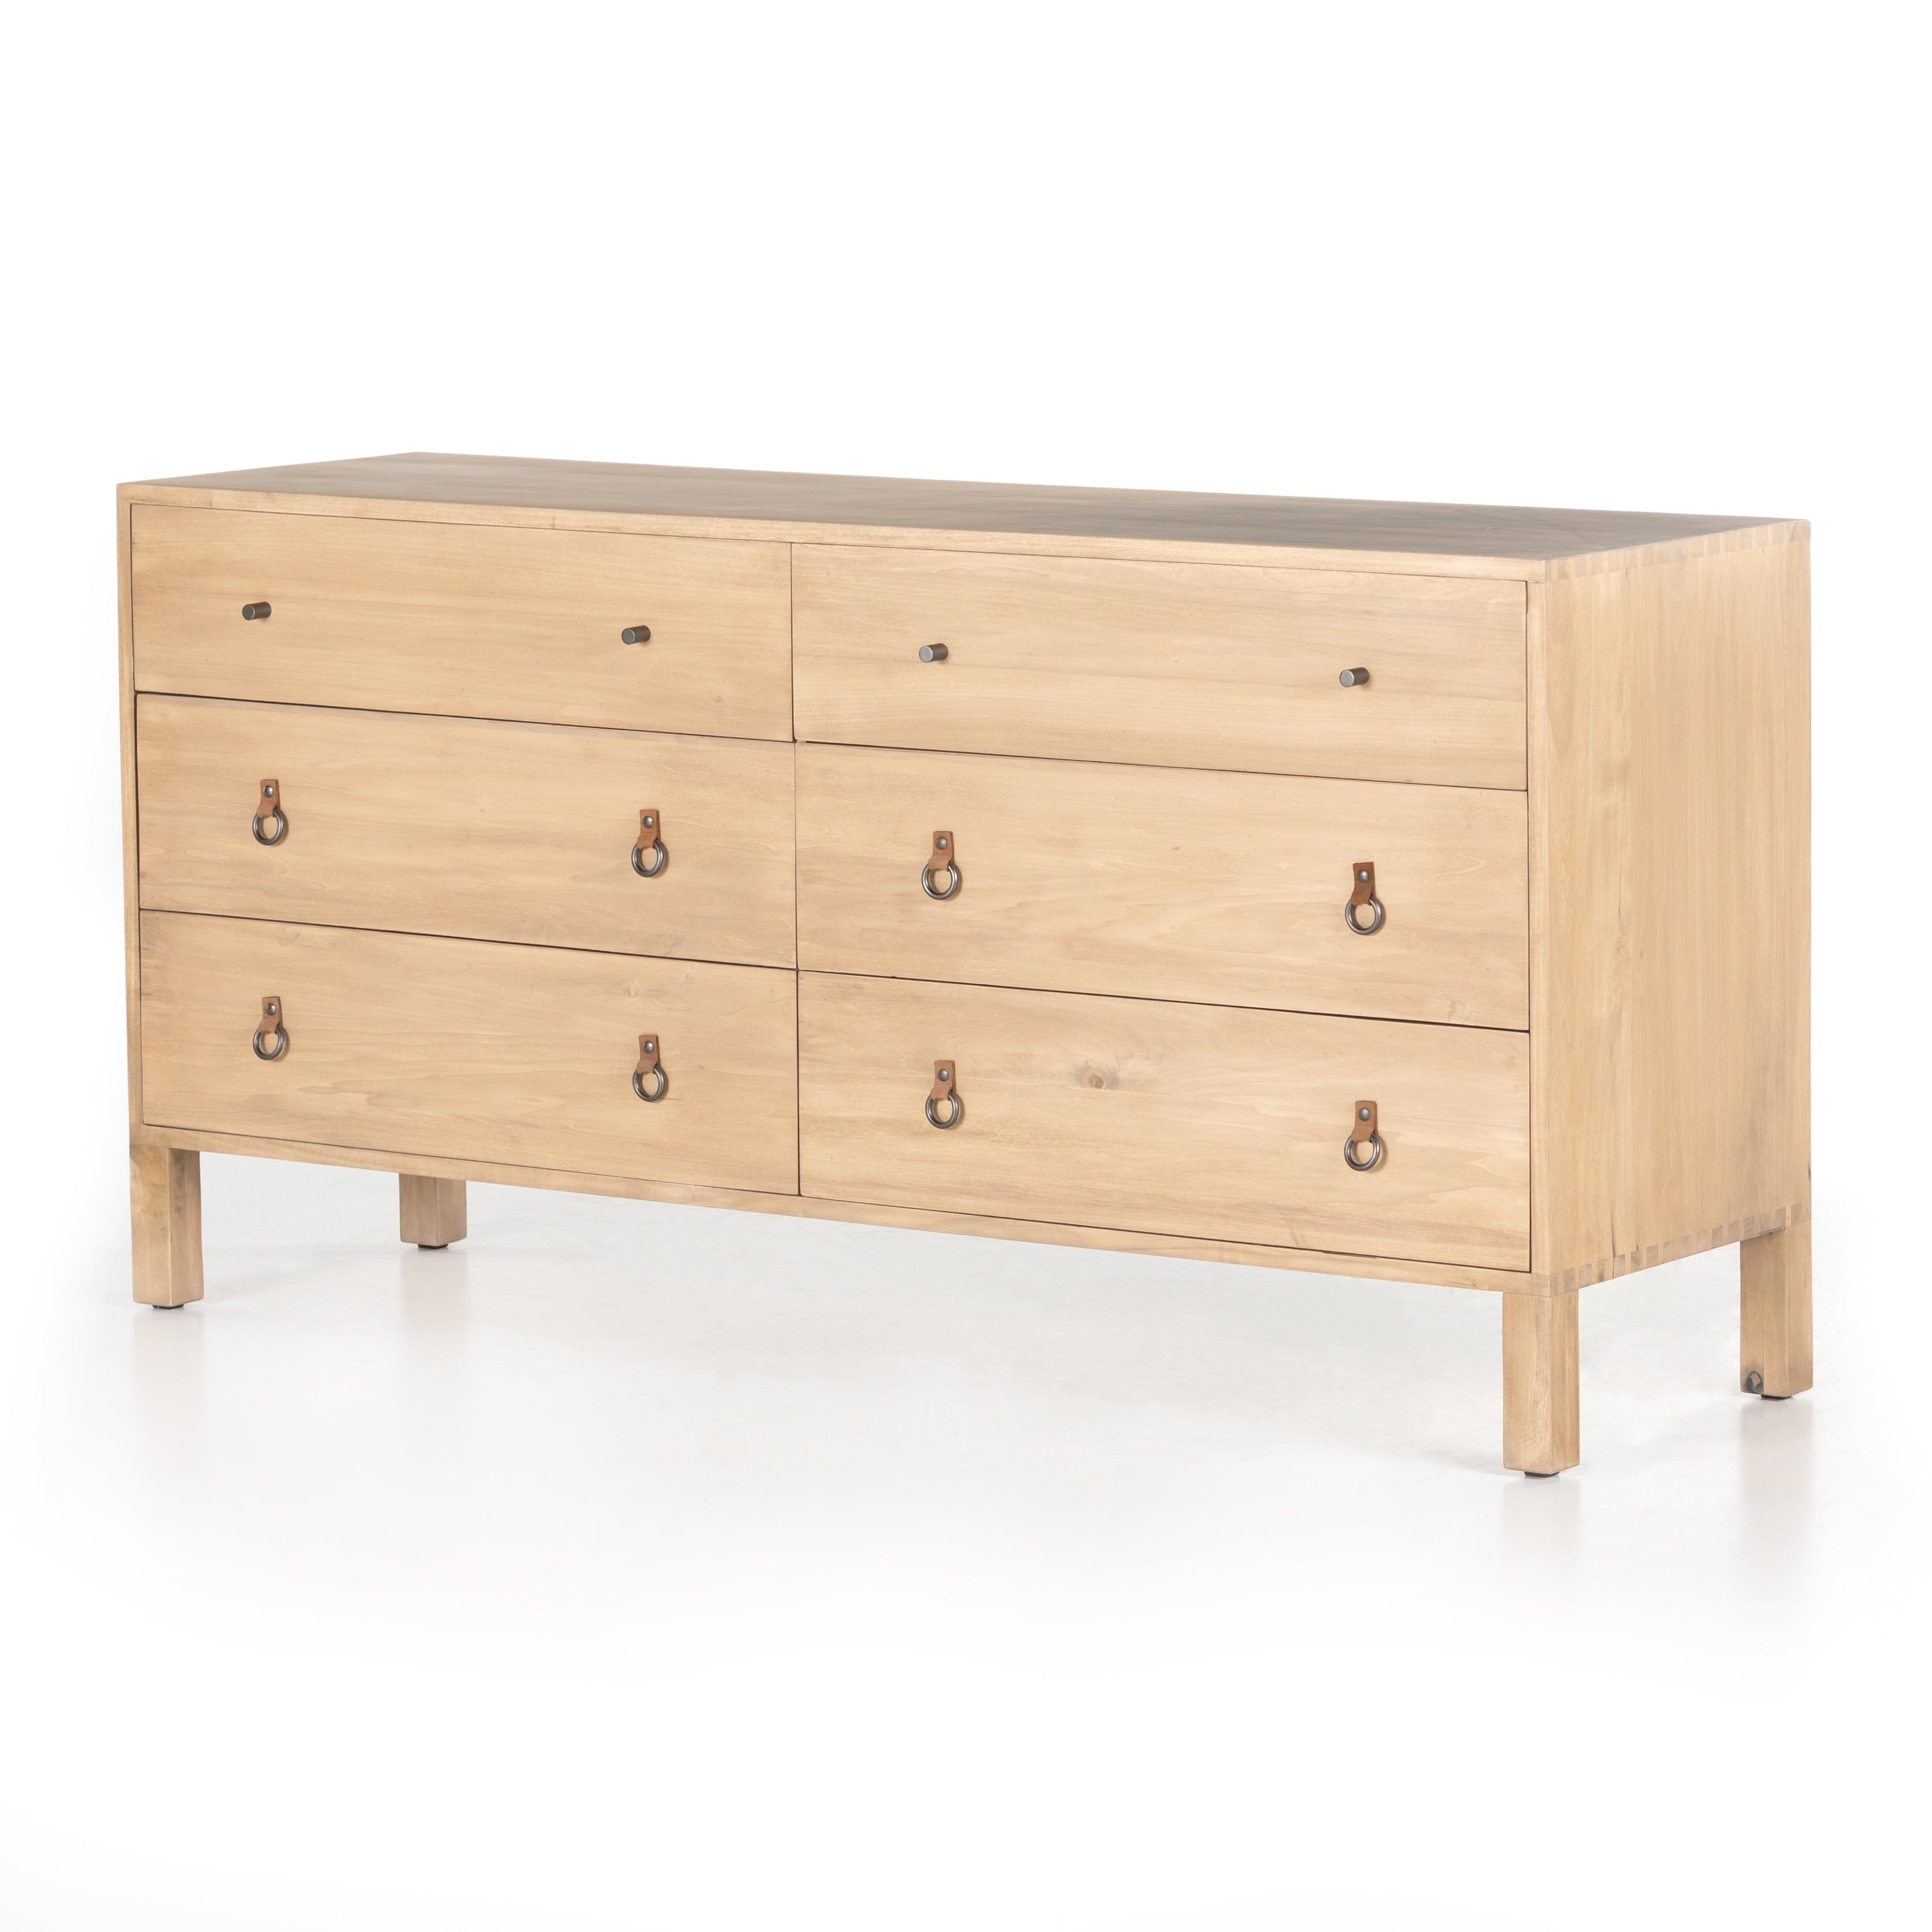 This Isador 6 Drawer Dresser - Dry Wash Poplar is beautifully simple in spirit. Solid dry-washed poplar forms a spacious six-drawer dresser, with dovetail joinery plus iron and leather hardware for a fresh, bright look in any bedroom.   Overall Dimensions: 65.00